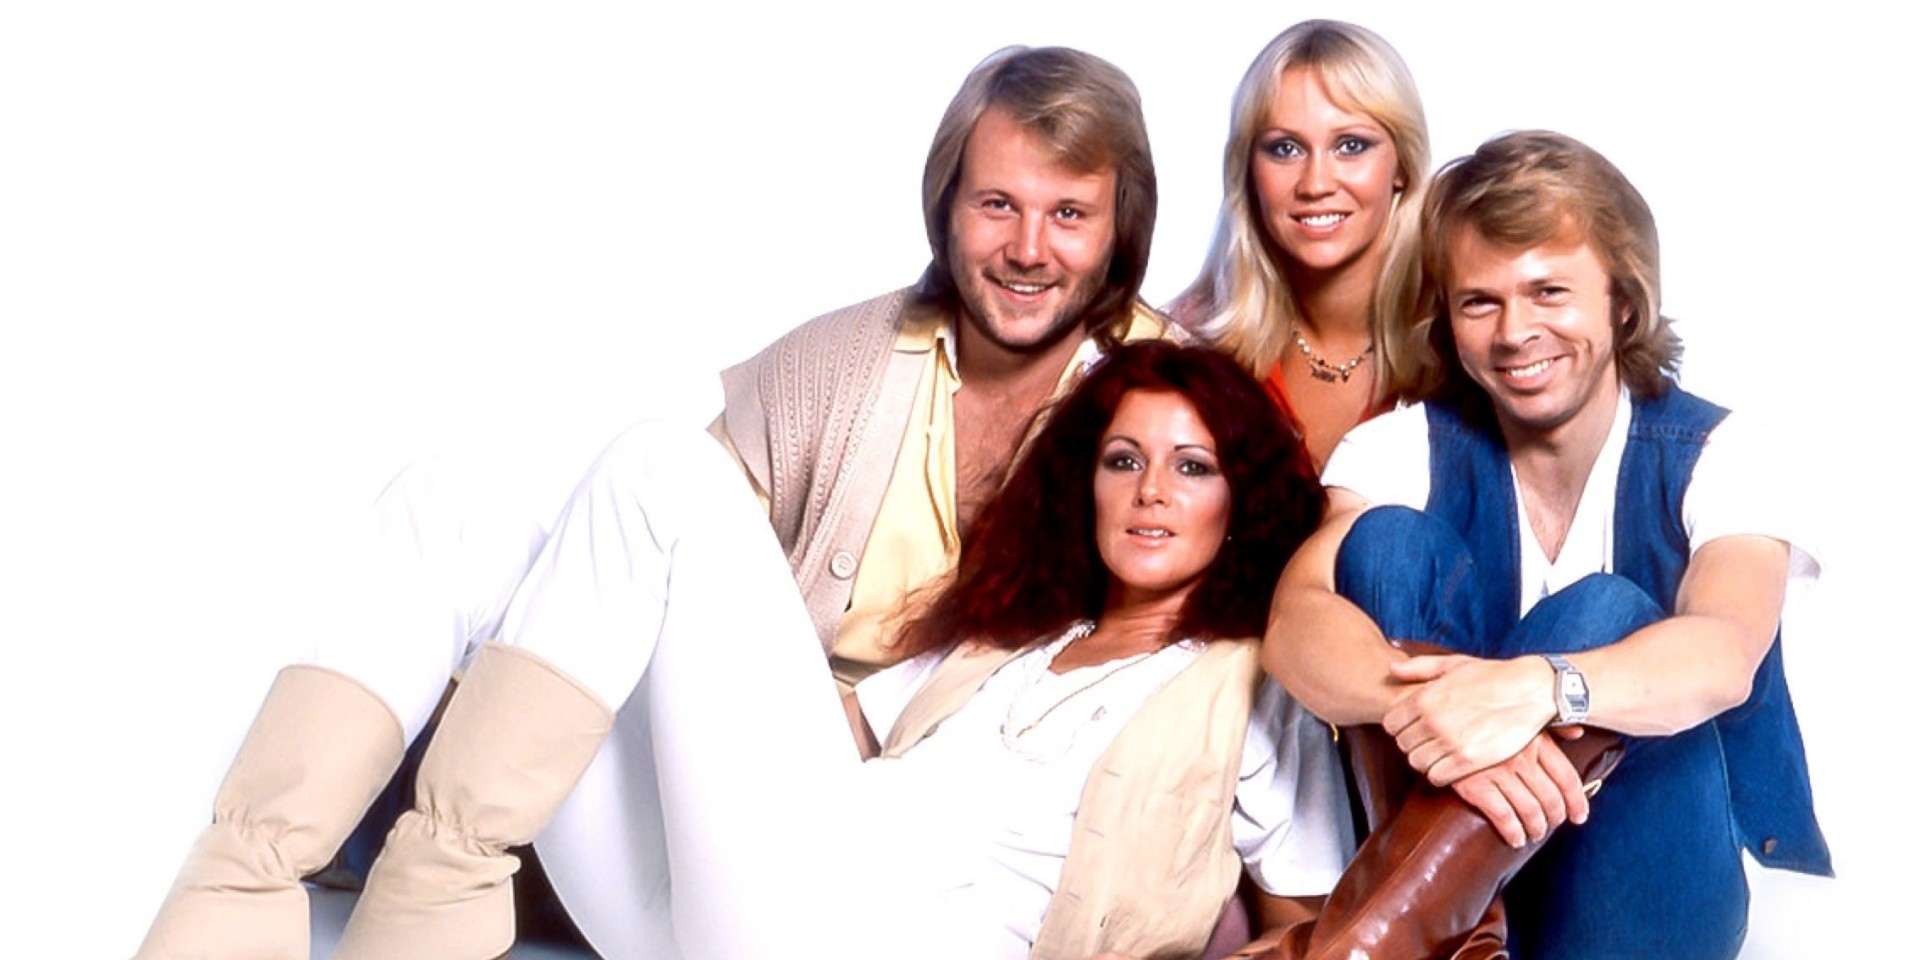 ABBA's Björn Ulvaeus reveals details on new music